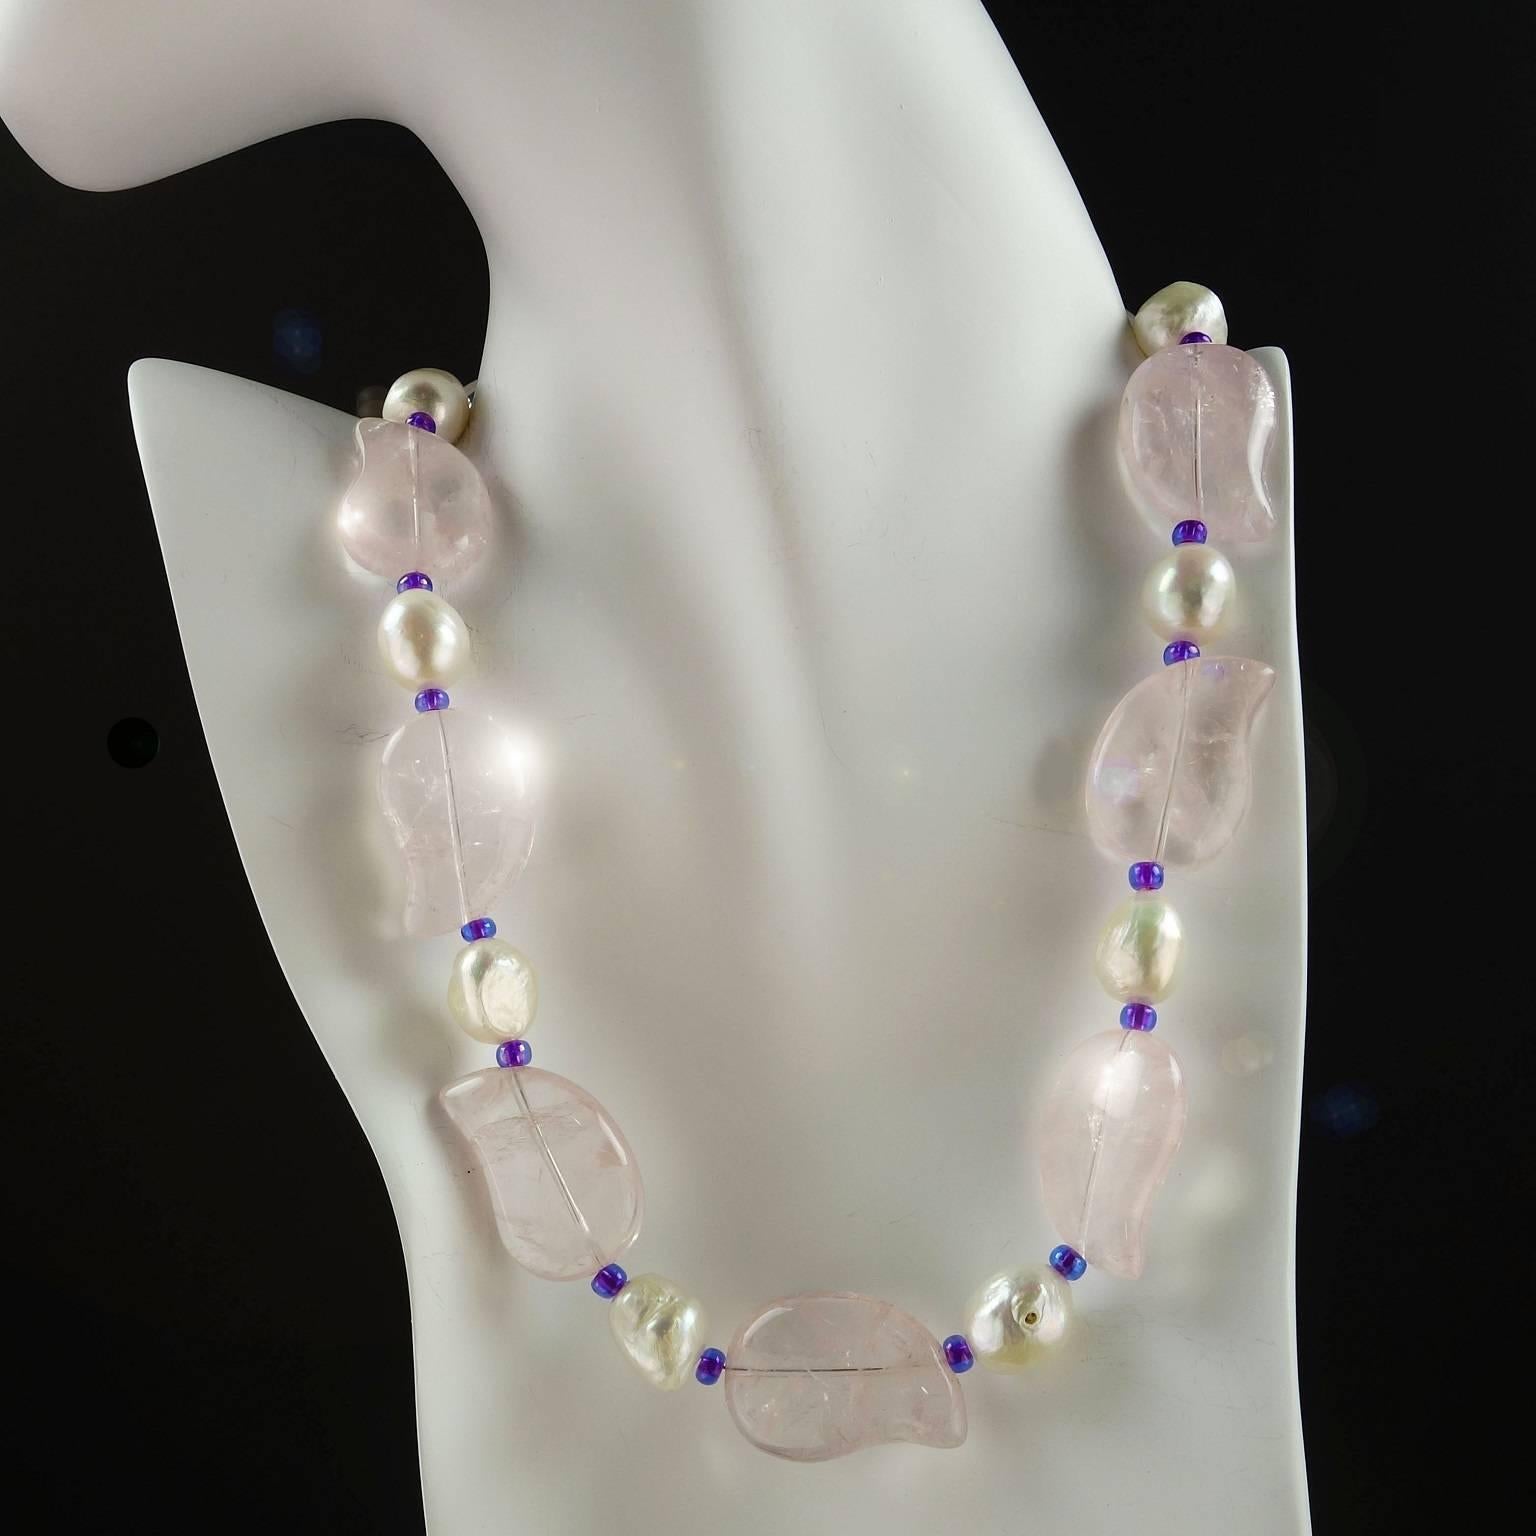 Lovely Leaf Shape Rose Quartz and White Pearl Necklace with Pearl Clasp.  These highly polished Rose Quartz leaves are transparent and alternate with White Pearls. They are accented with purple Czech beads.  The clasp is a Baroque Pearl and can be a